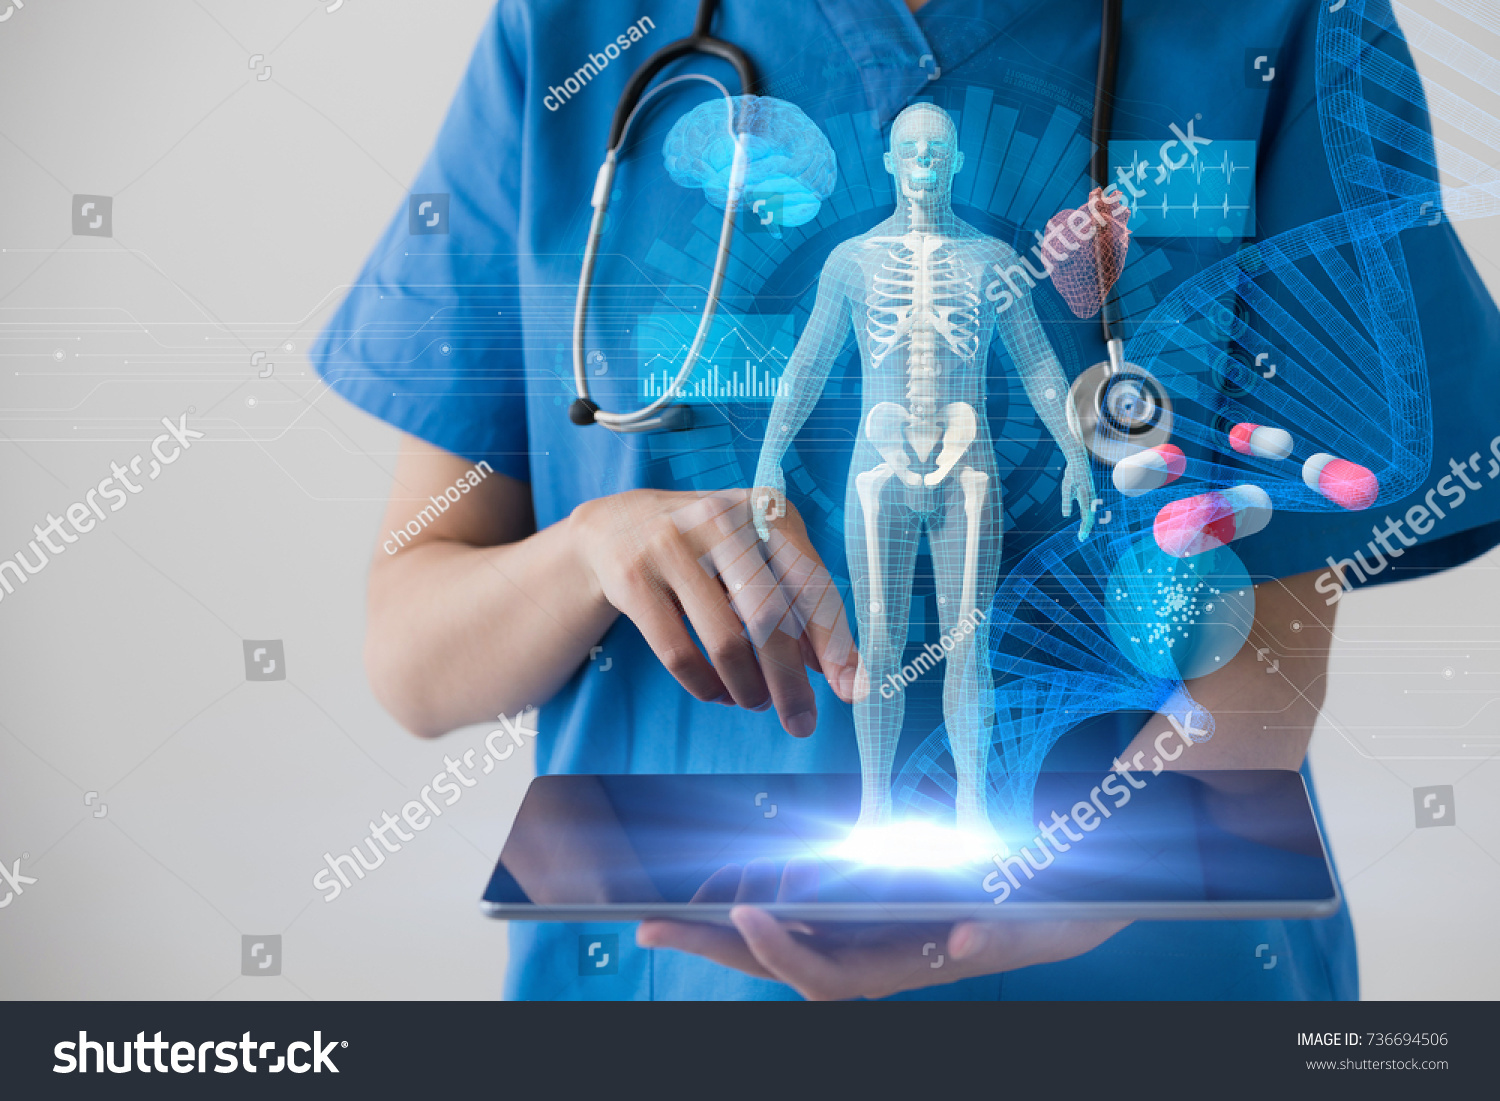 Medical technology concept. Electronic medical record. #736694506